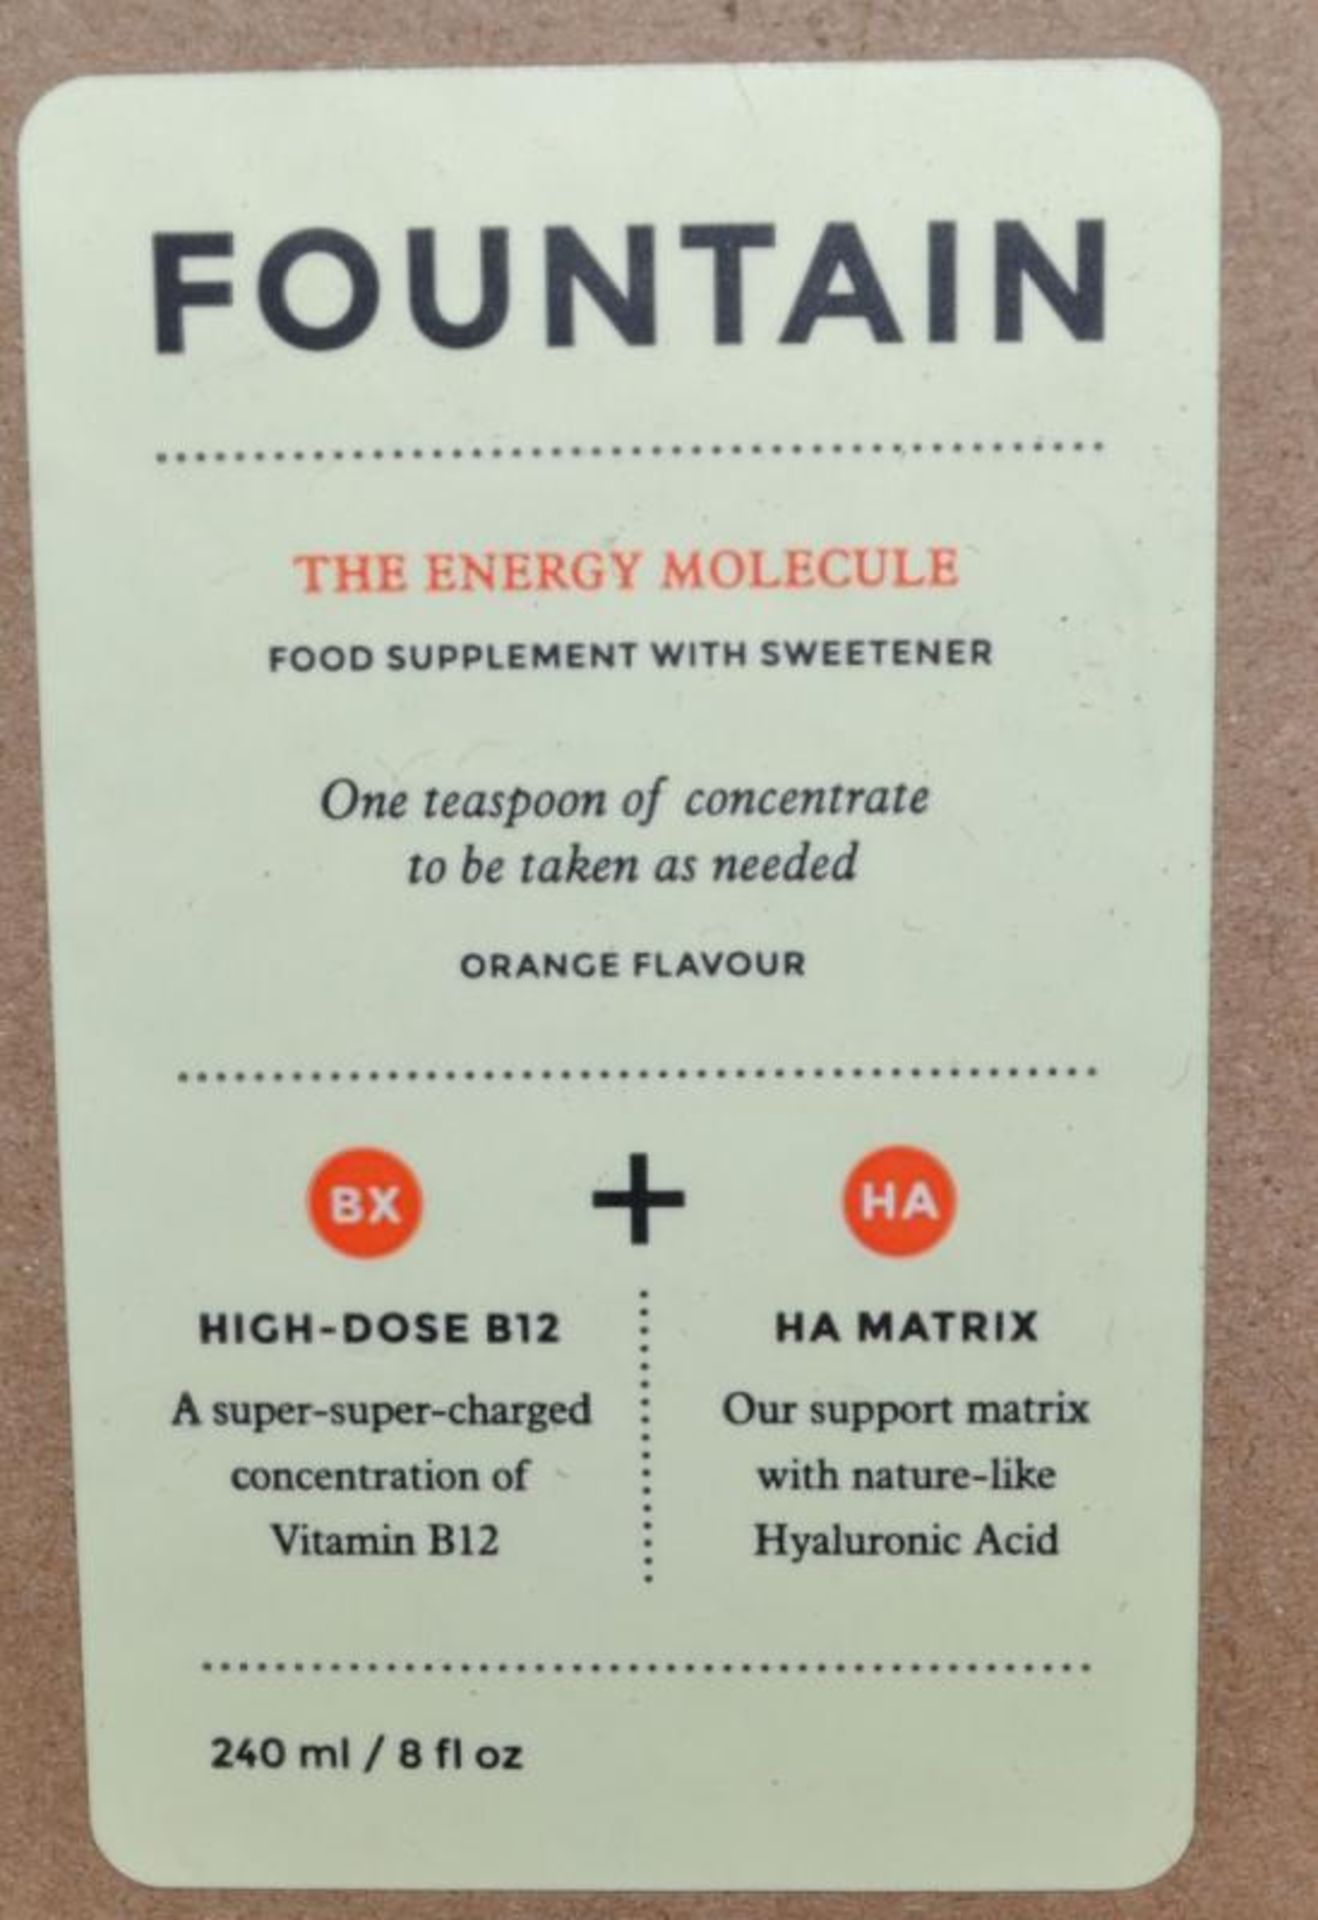 10 x 240ml Bottles of Fountain, The Energy Molecule Supplement - New & Boxed - CL185 - Ref: DRT0643 - Image 7 of 7